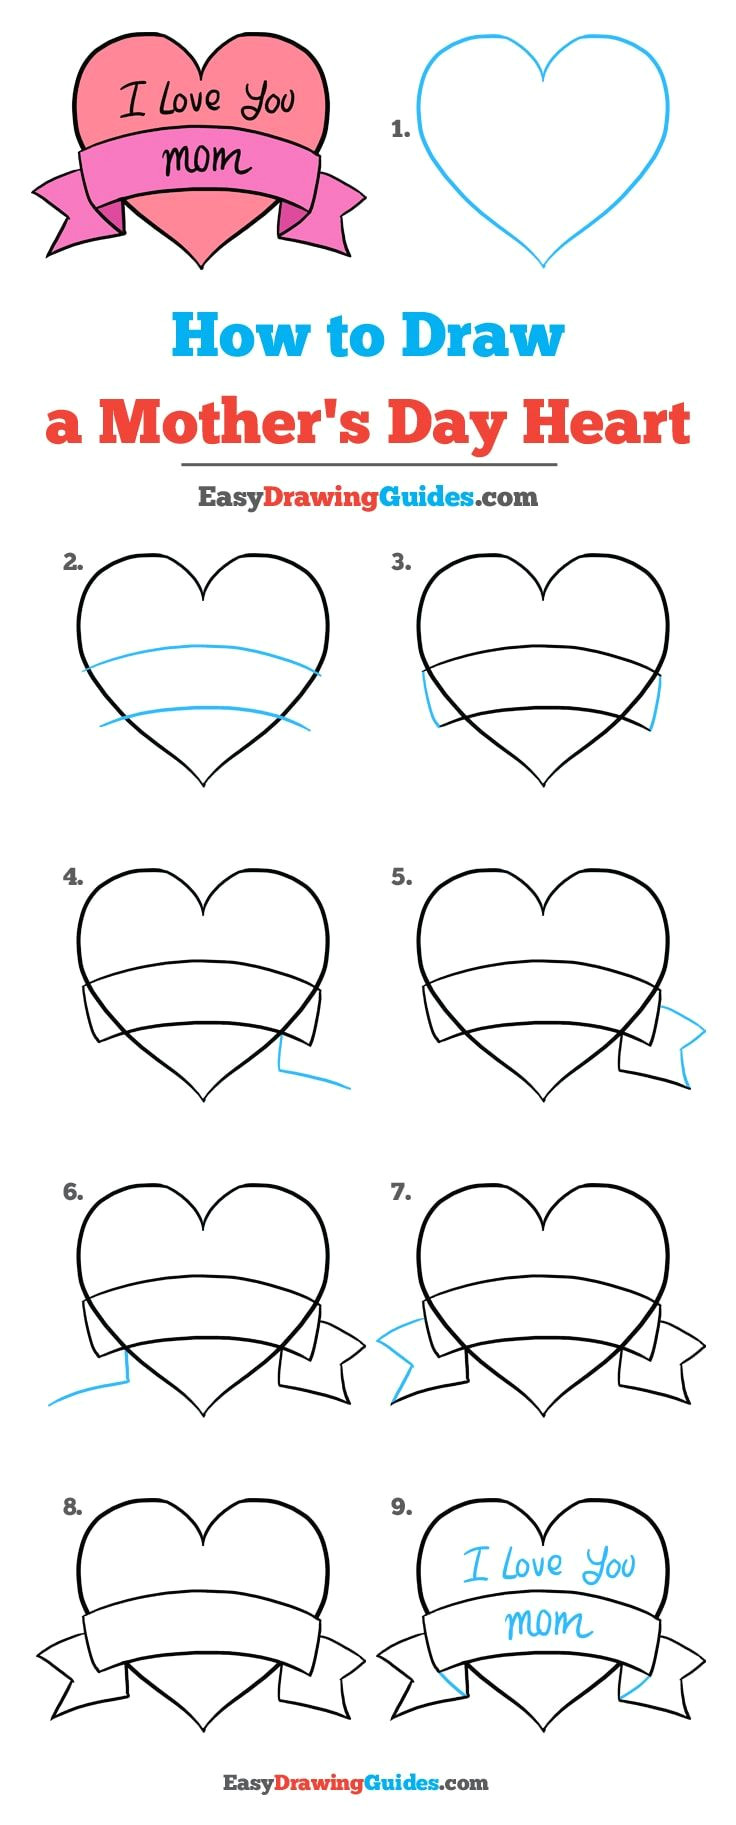 Easy Drawings 101 How to Draw A Mother S Day Heart Really Easy Drawing Tutorial